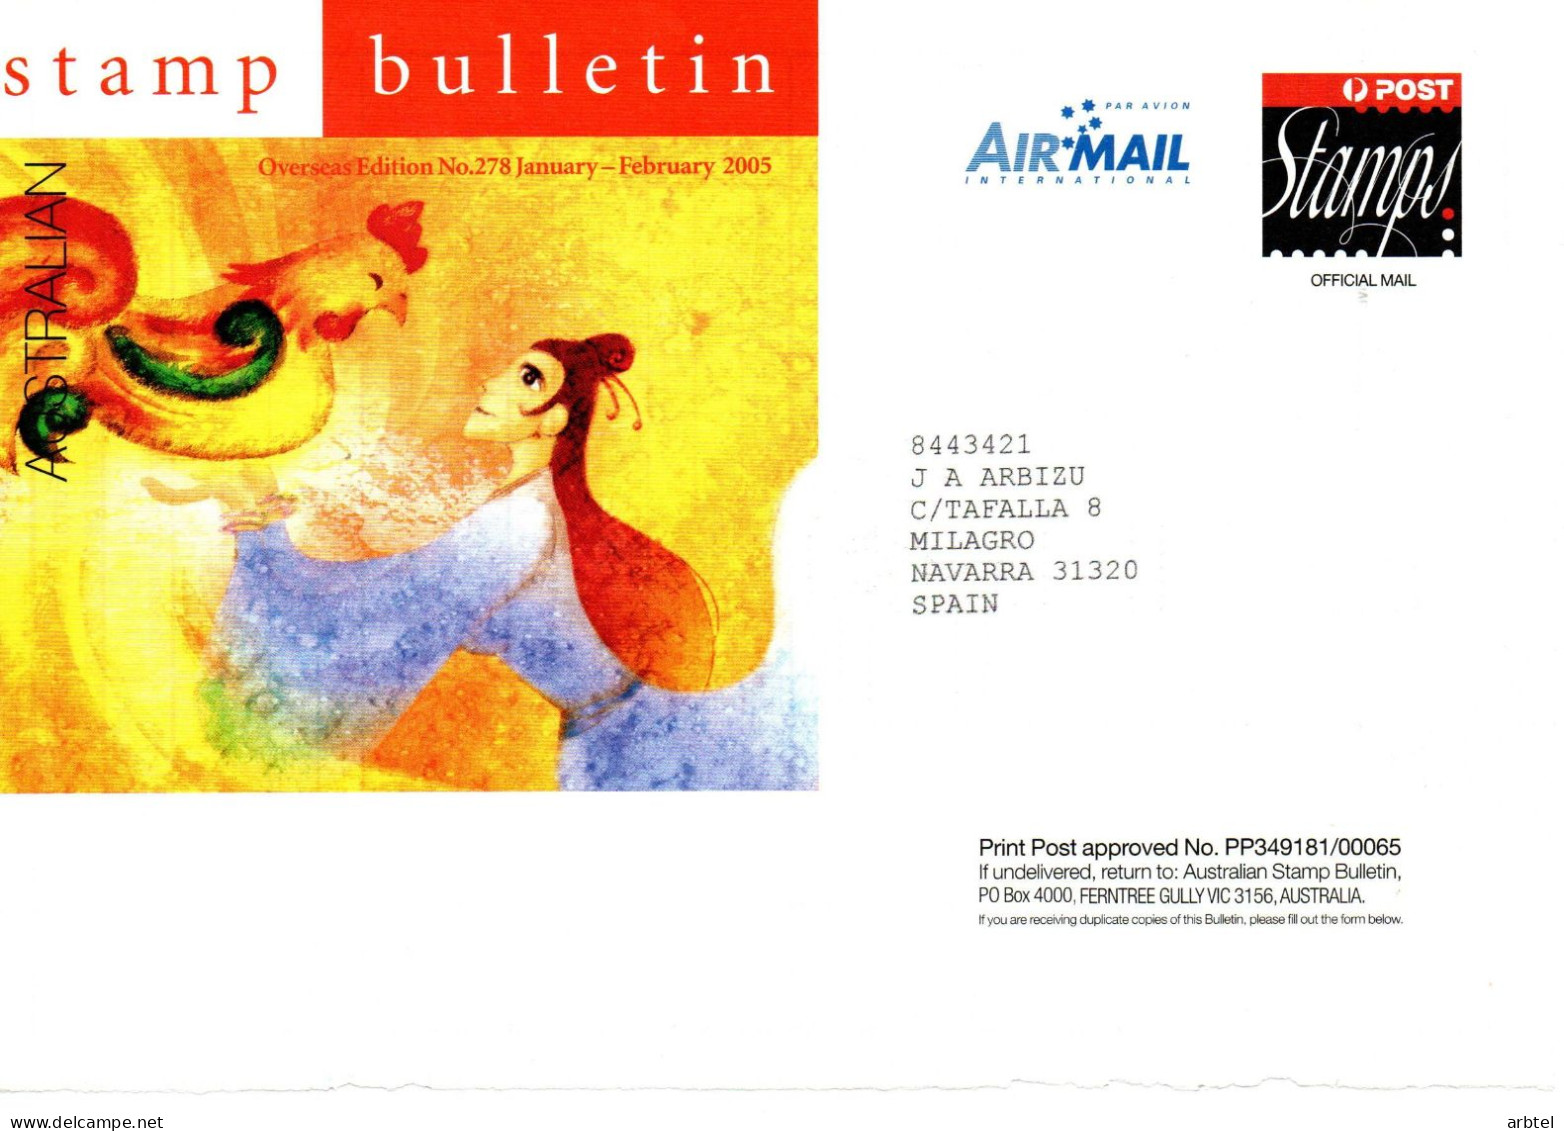 AUSTRALIA STAMP BULLETIN FRONTAL FRONT OFFICIAL MAIL 2005 ARTE GALLINA HEN - Gallinacées & Faisans